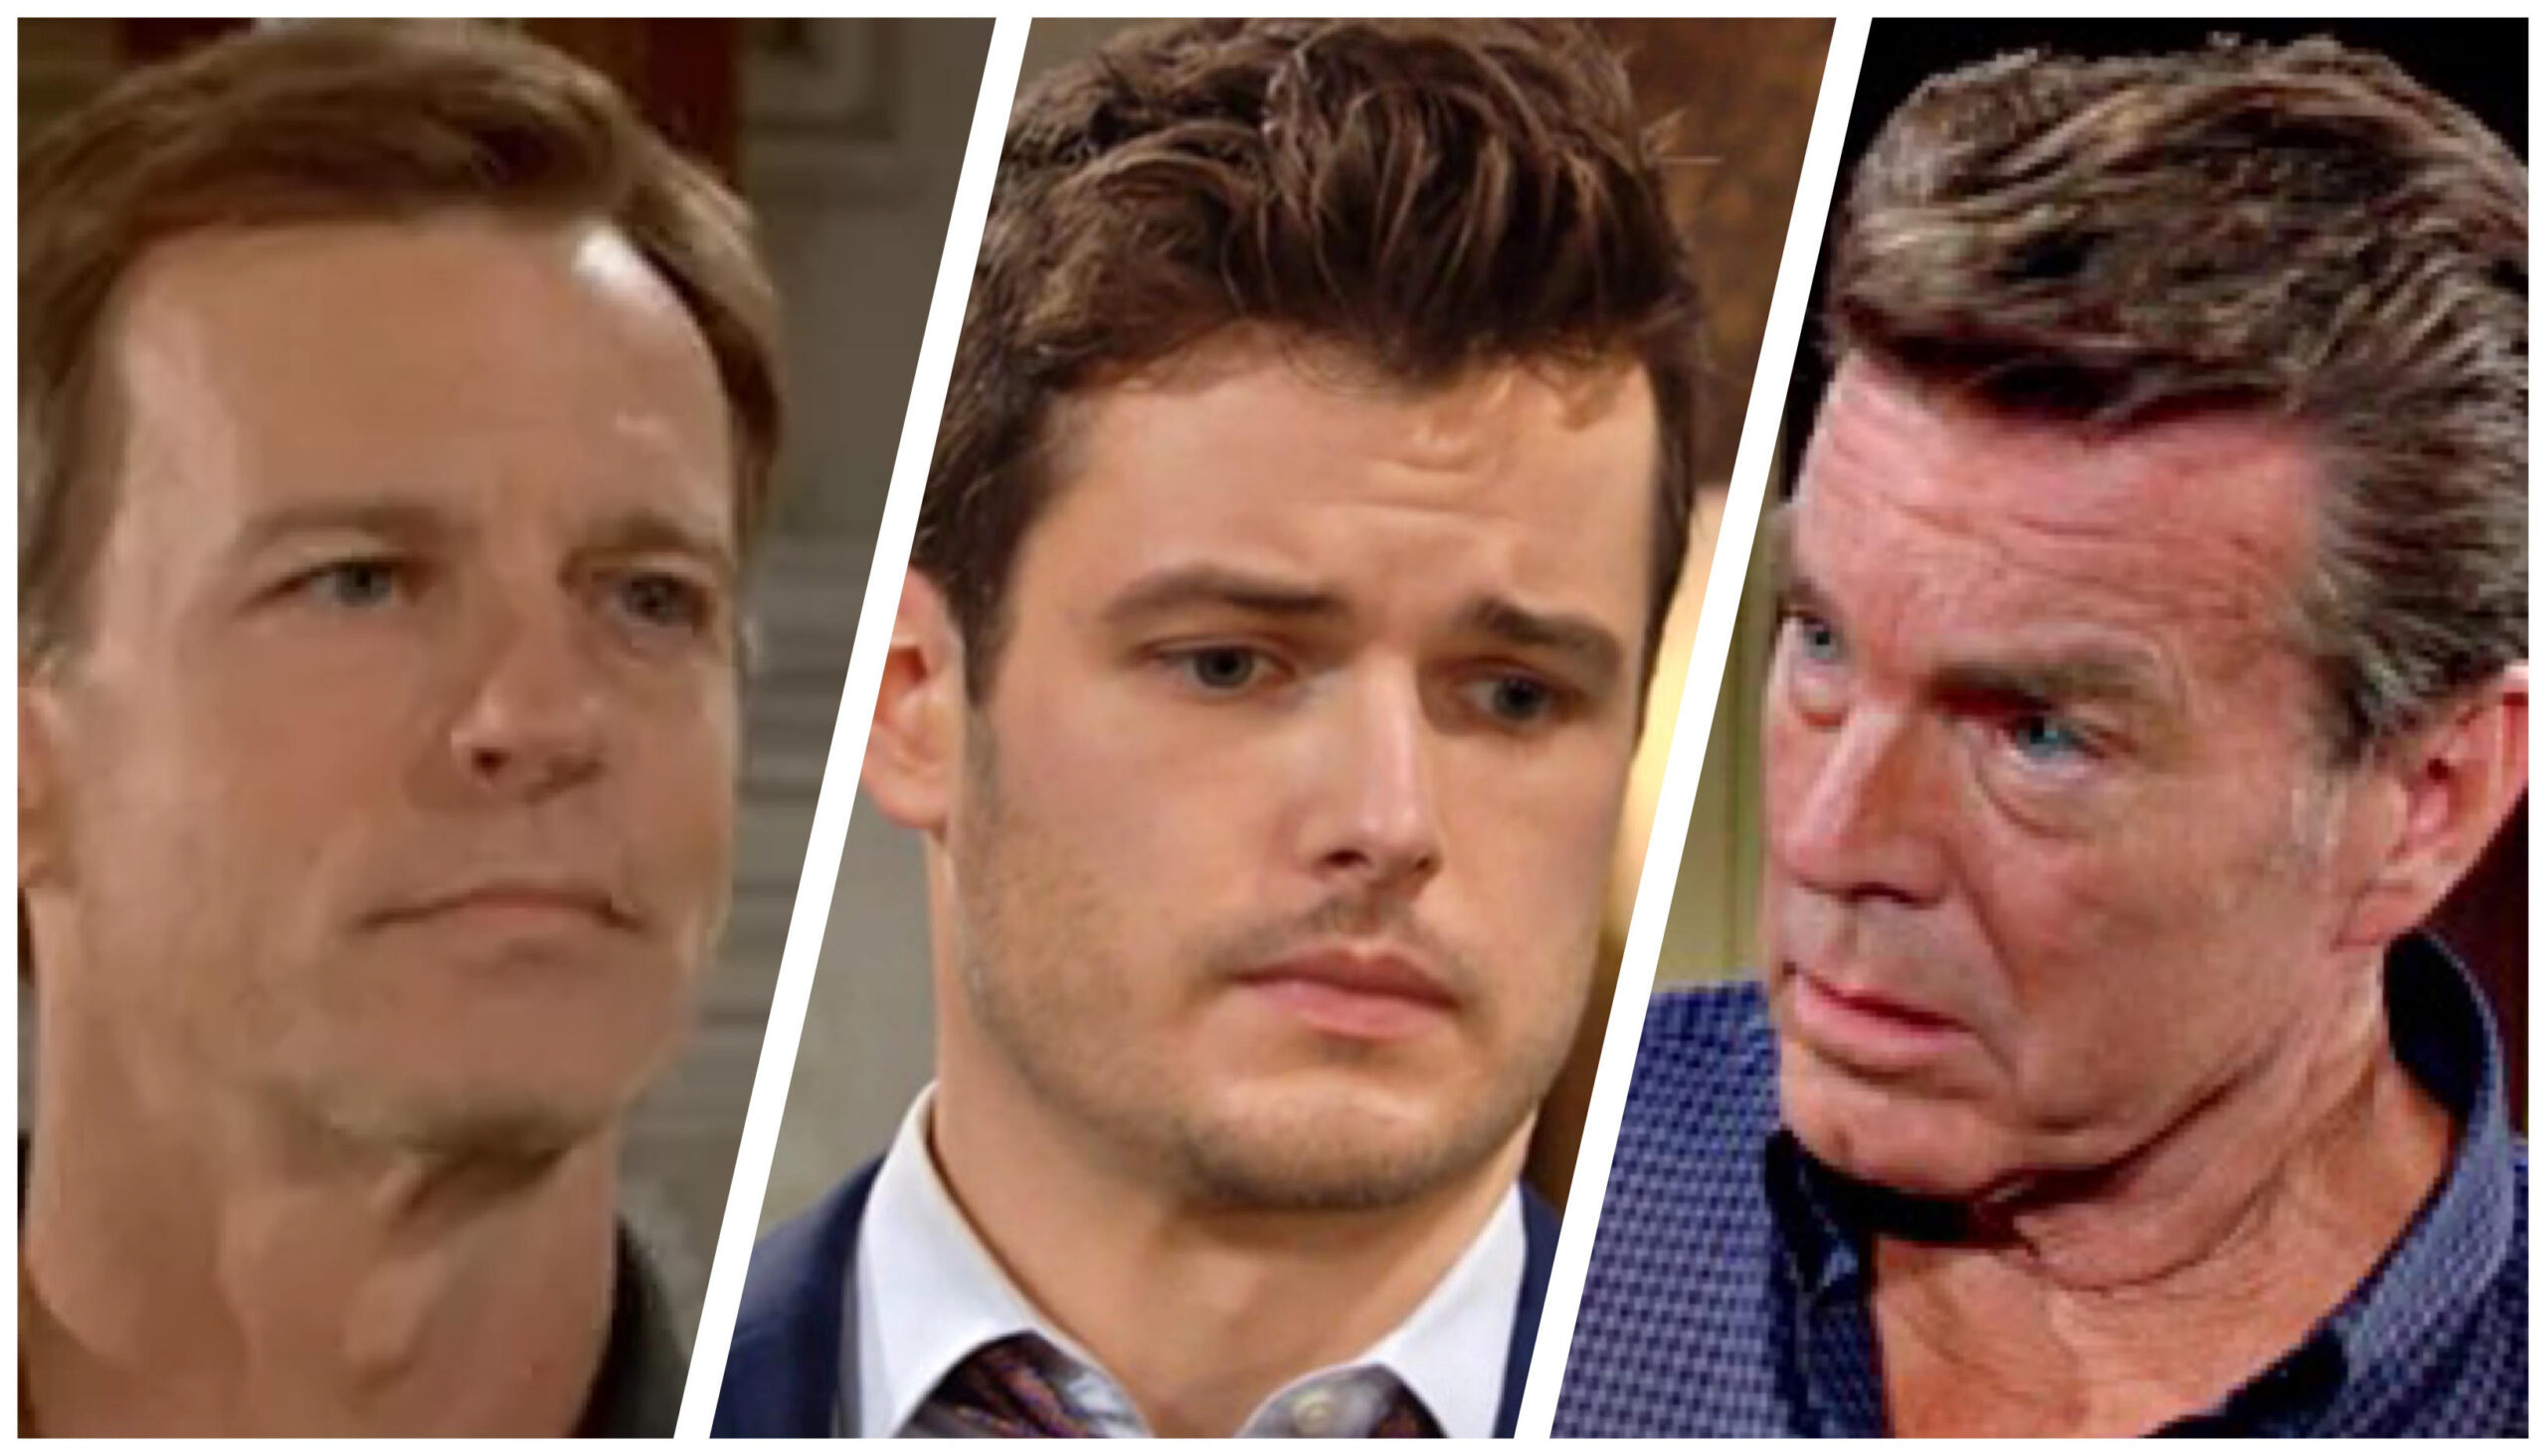 The Young and the Restless spoilers featuring Tucker McCall Kyle Abbott and Jack Abbott